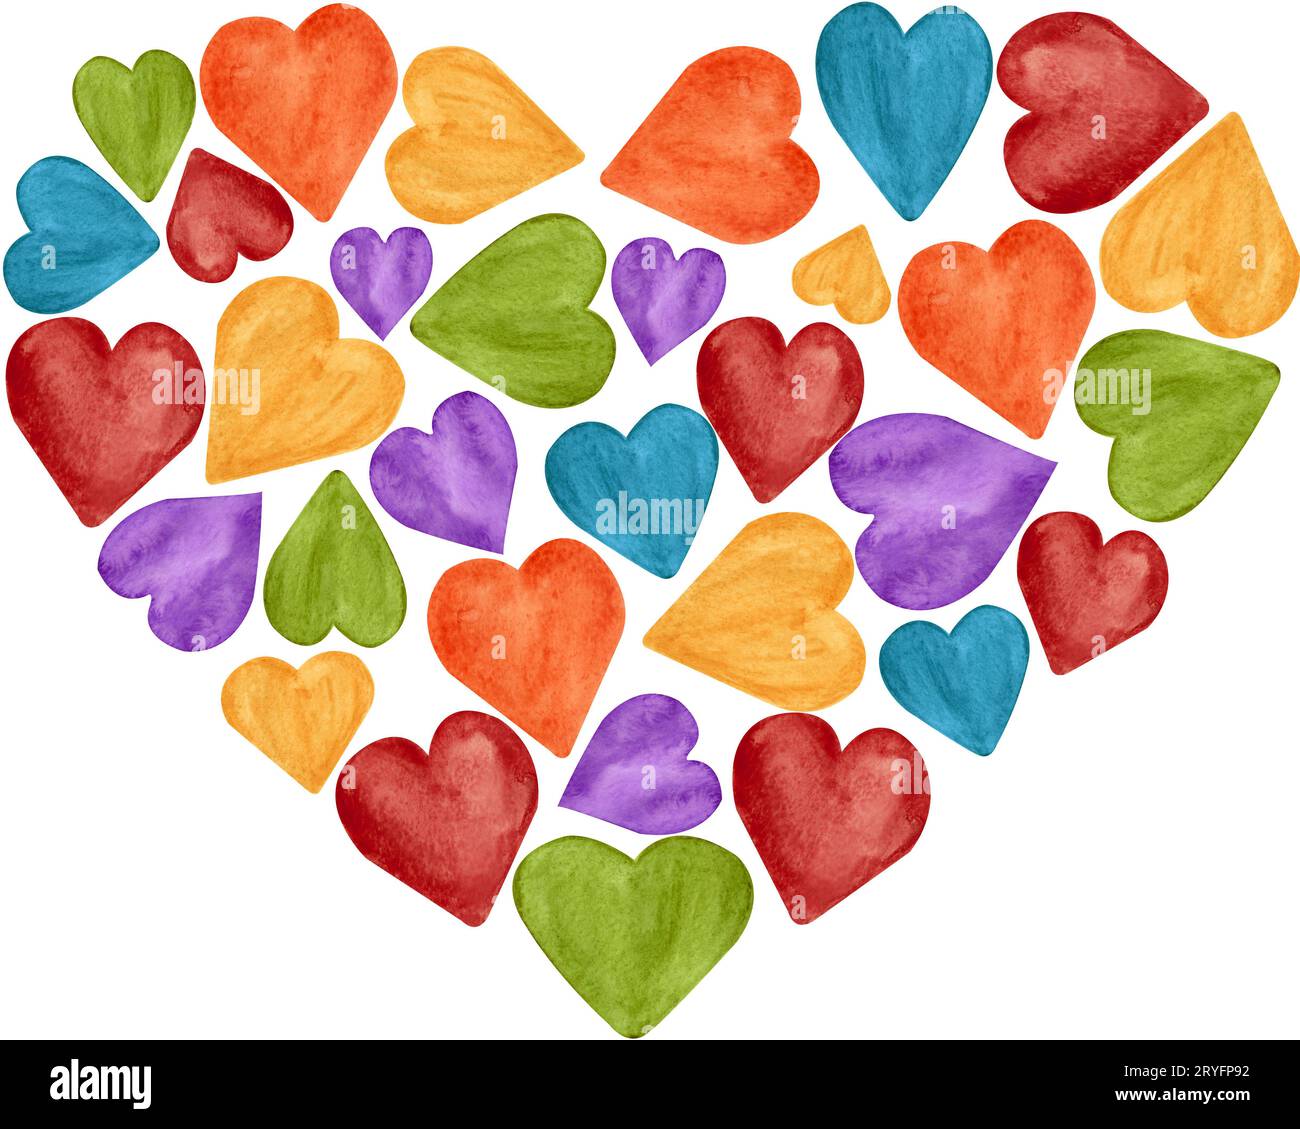 Pride Watercolor Hearts Isolated on White Background. LGBT+, Stock Photo